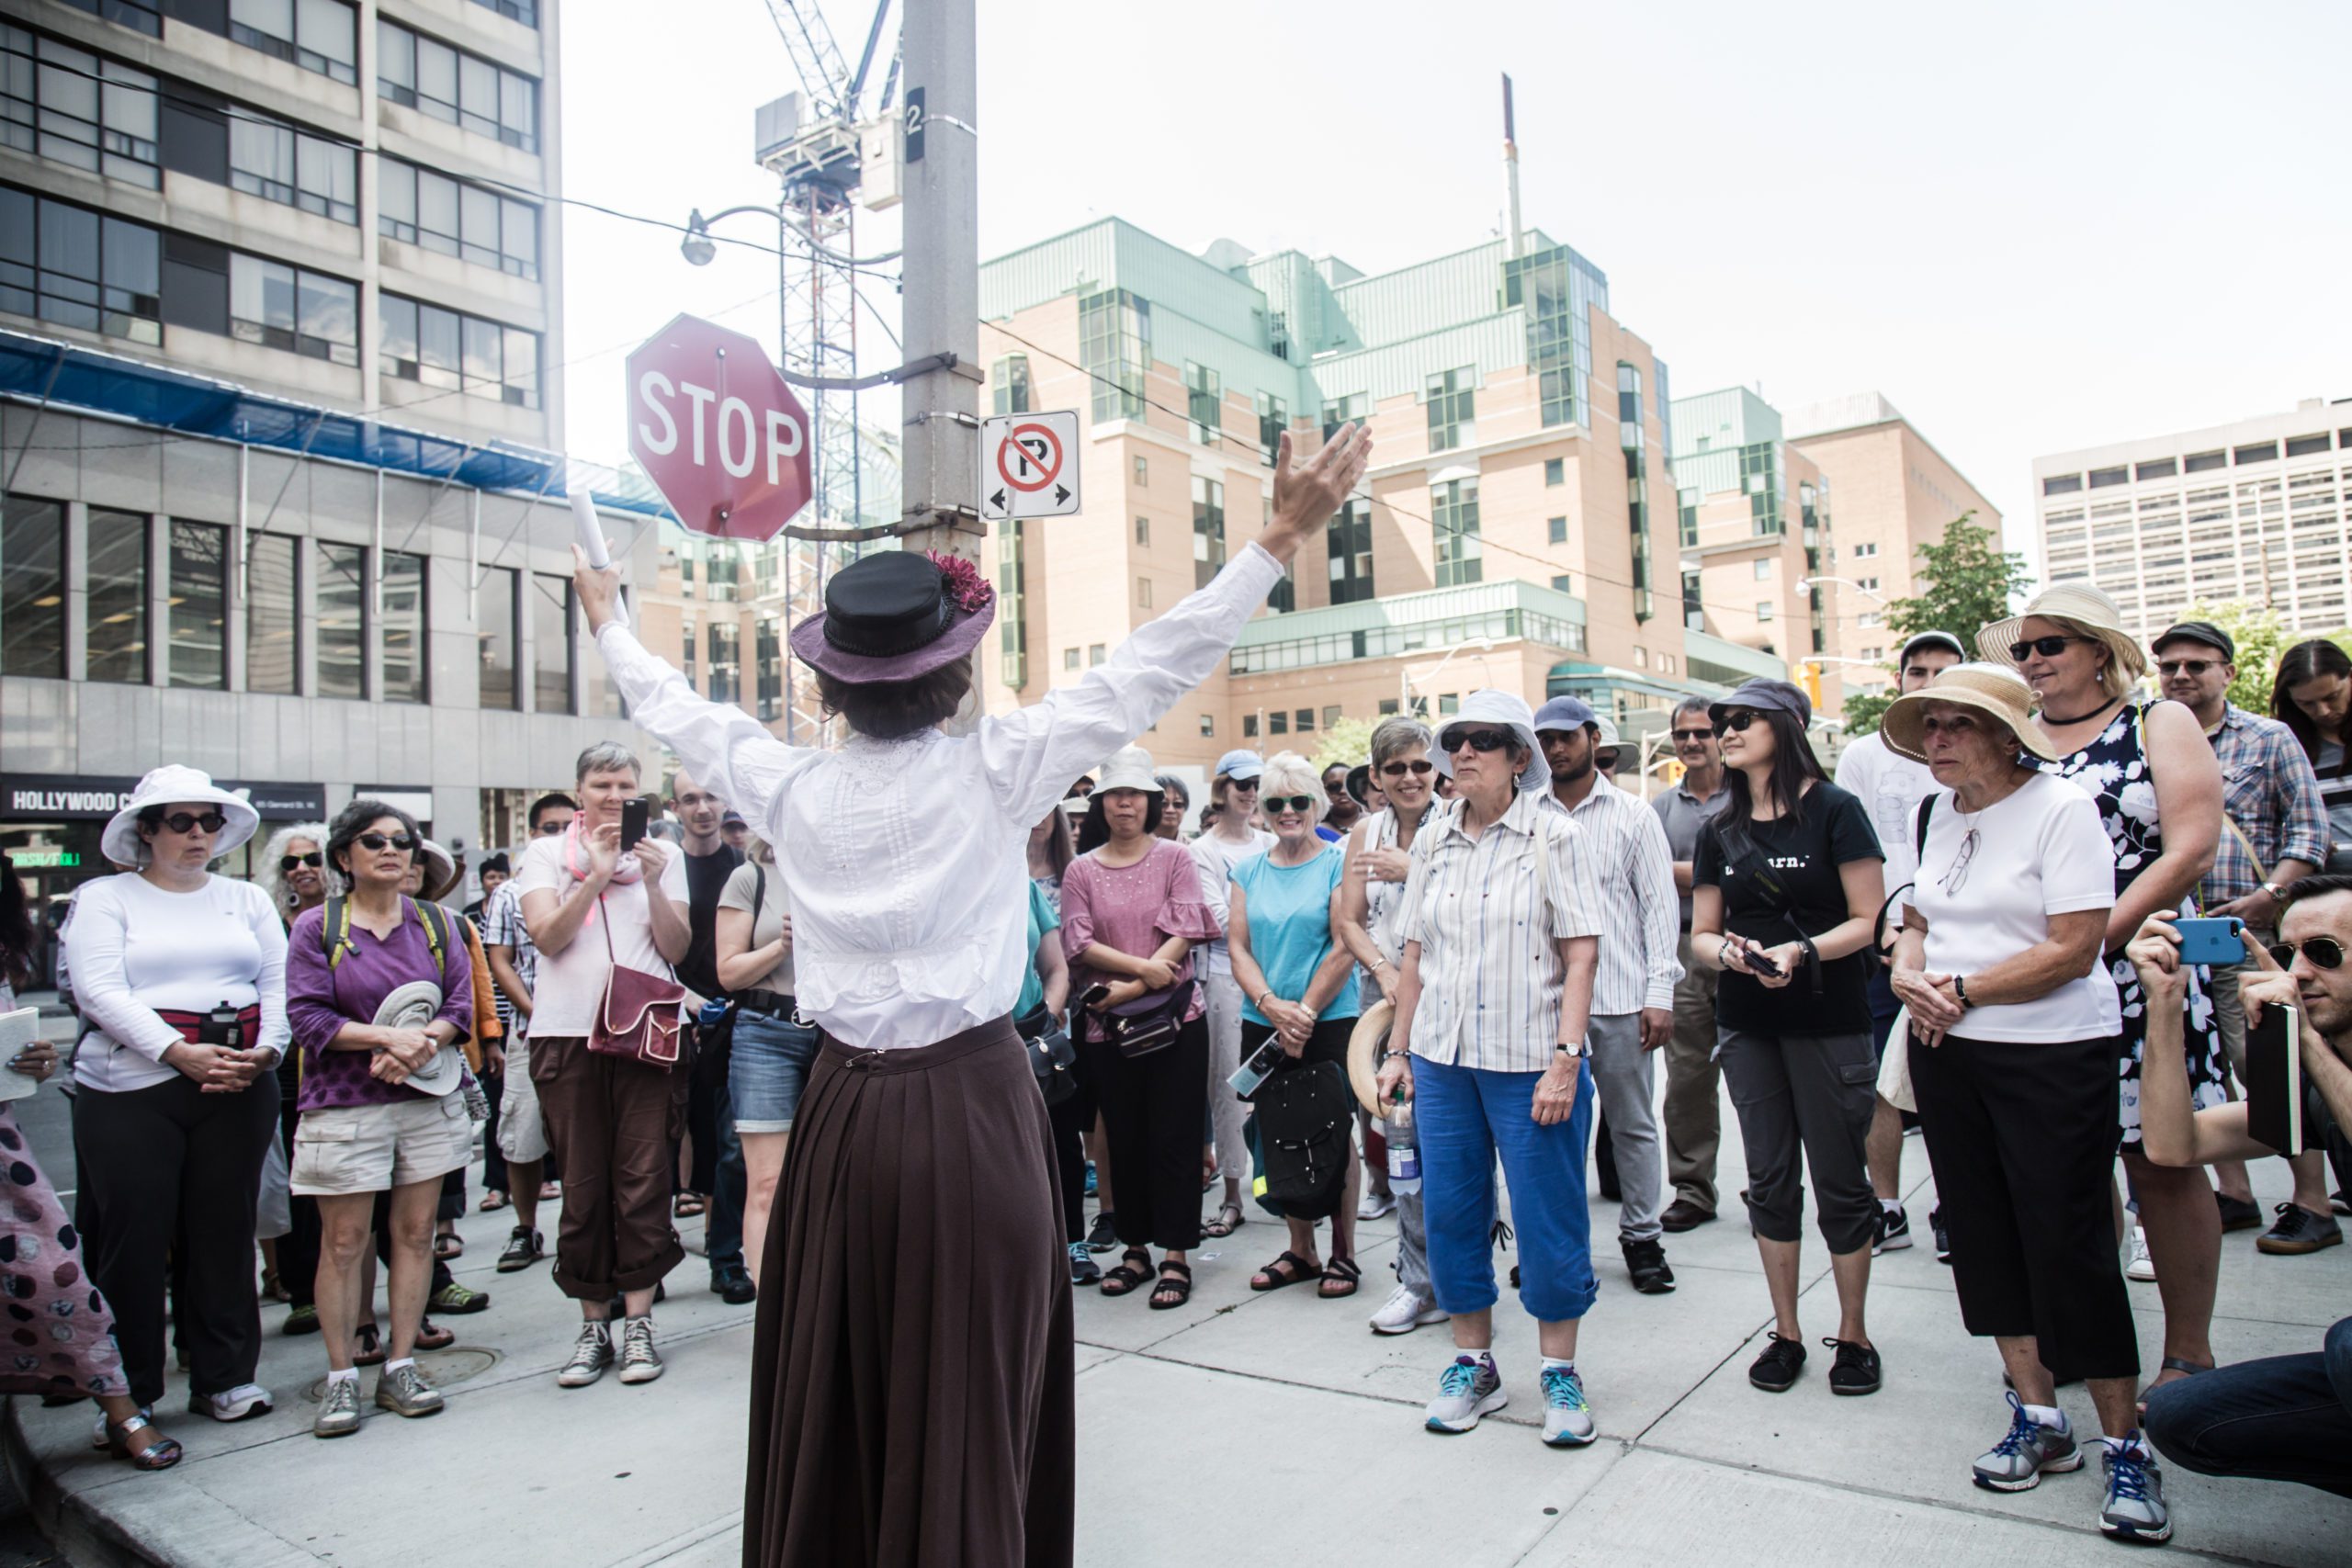 Woman in period costume talking about Women of the Ward to onlooking crowd, Toronto